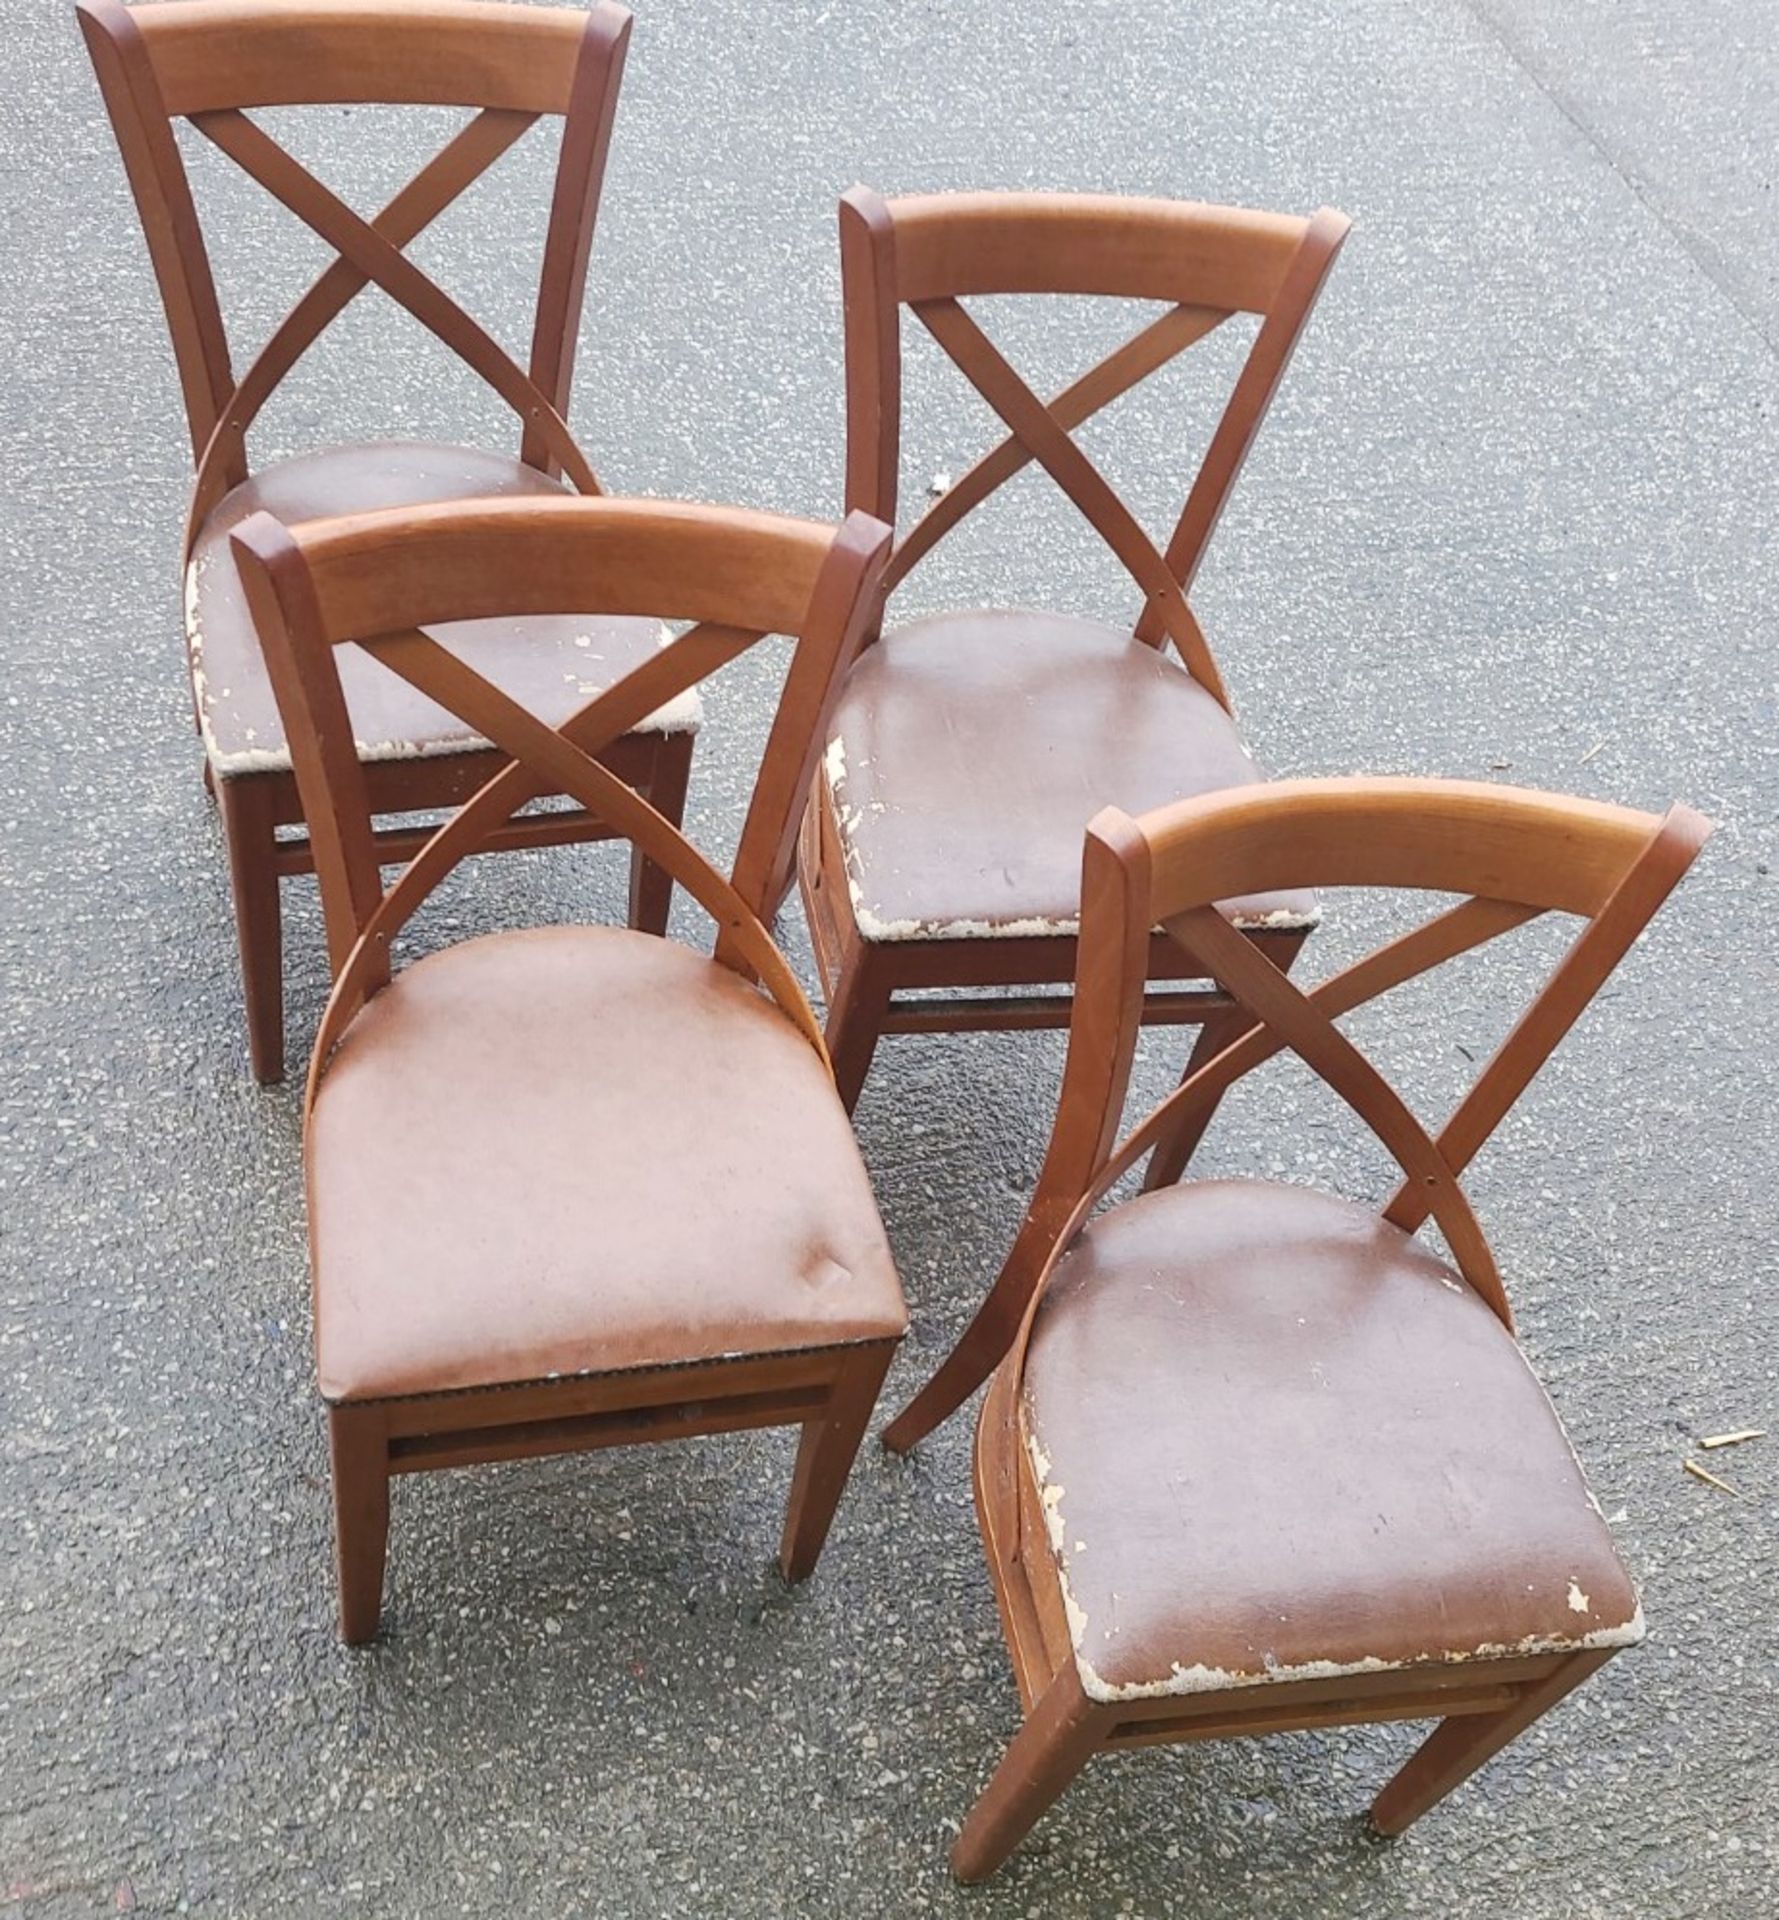 Set Of 4 x 'Leopold' Style Bentwood Side Chair In Walnut Stain & Faux Brown Leather Seat Cushion - Image 5 of 5